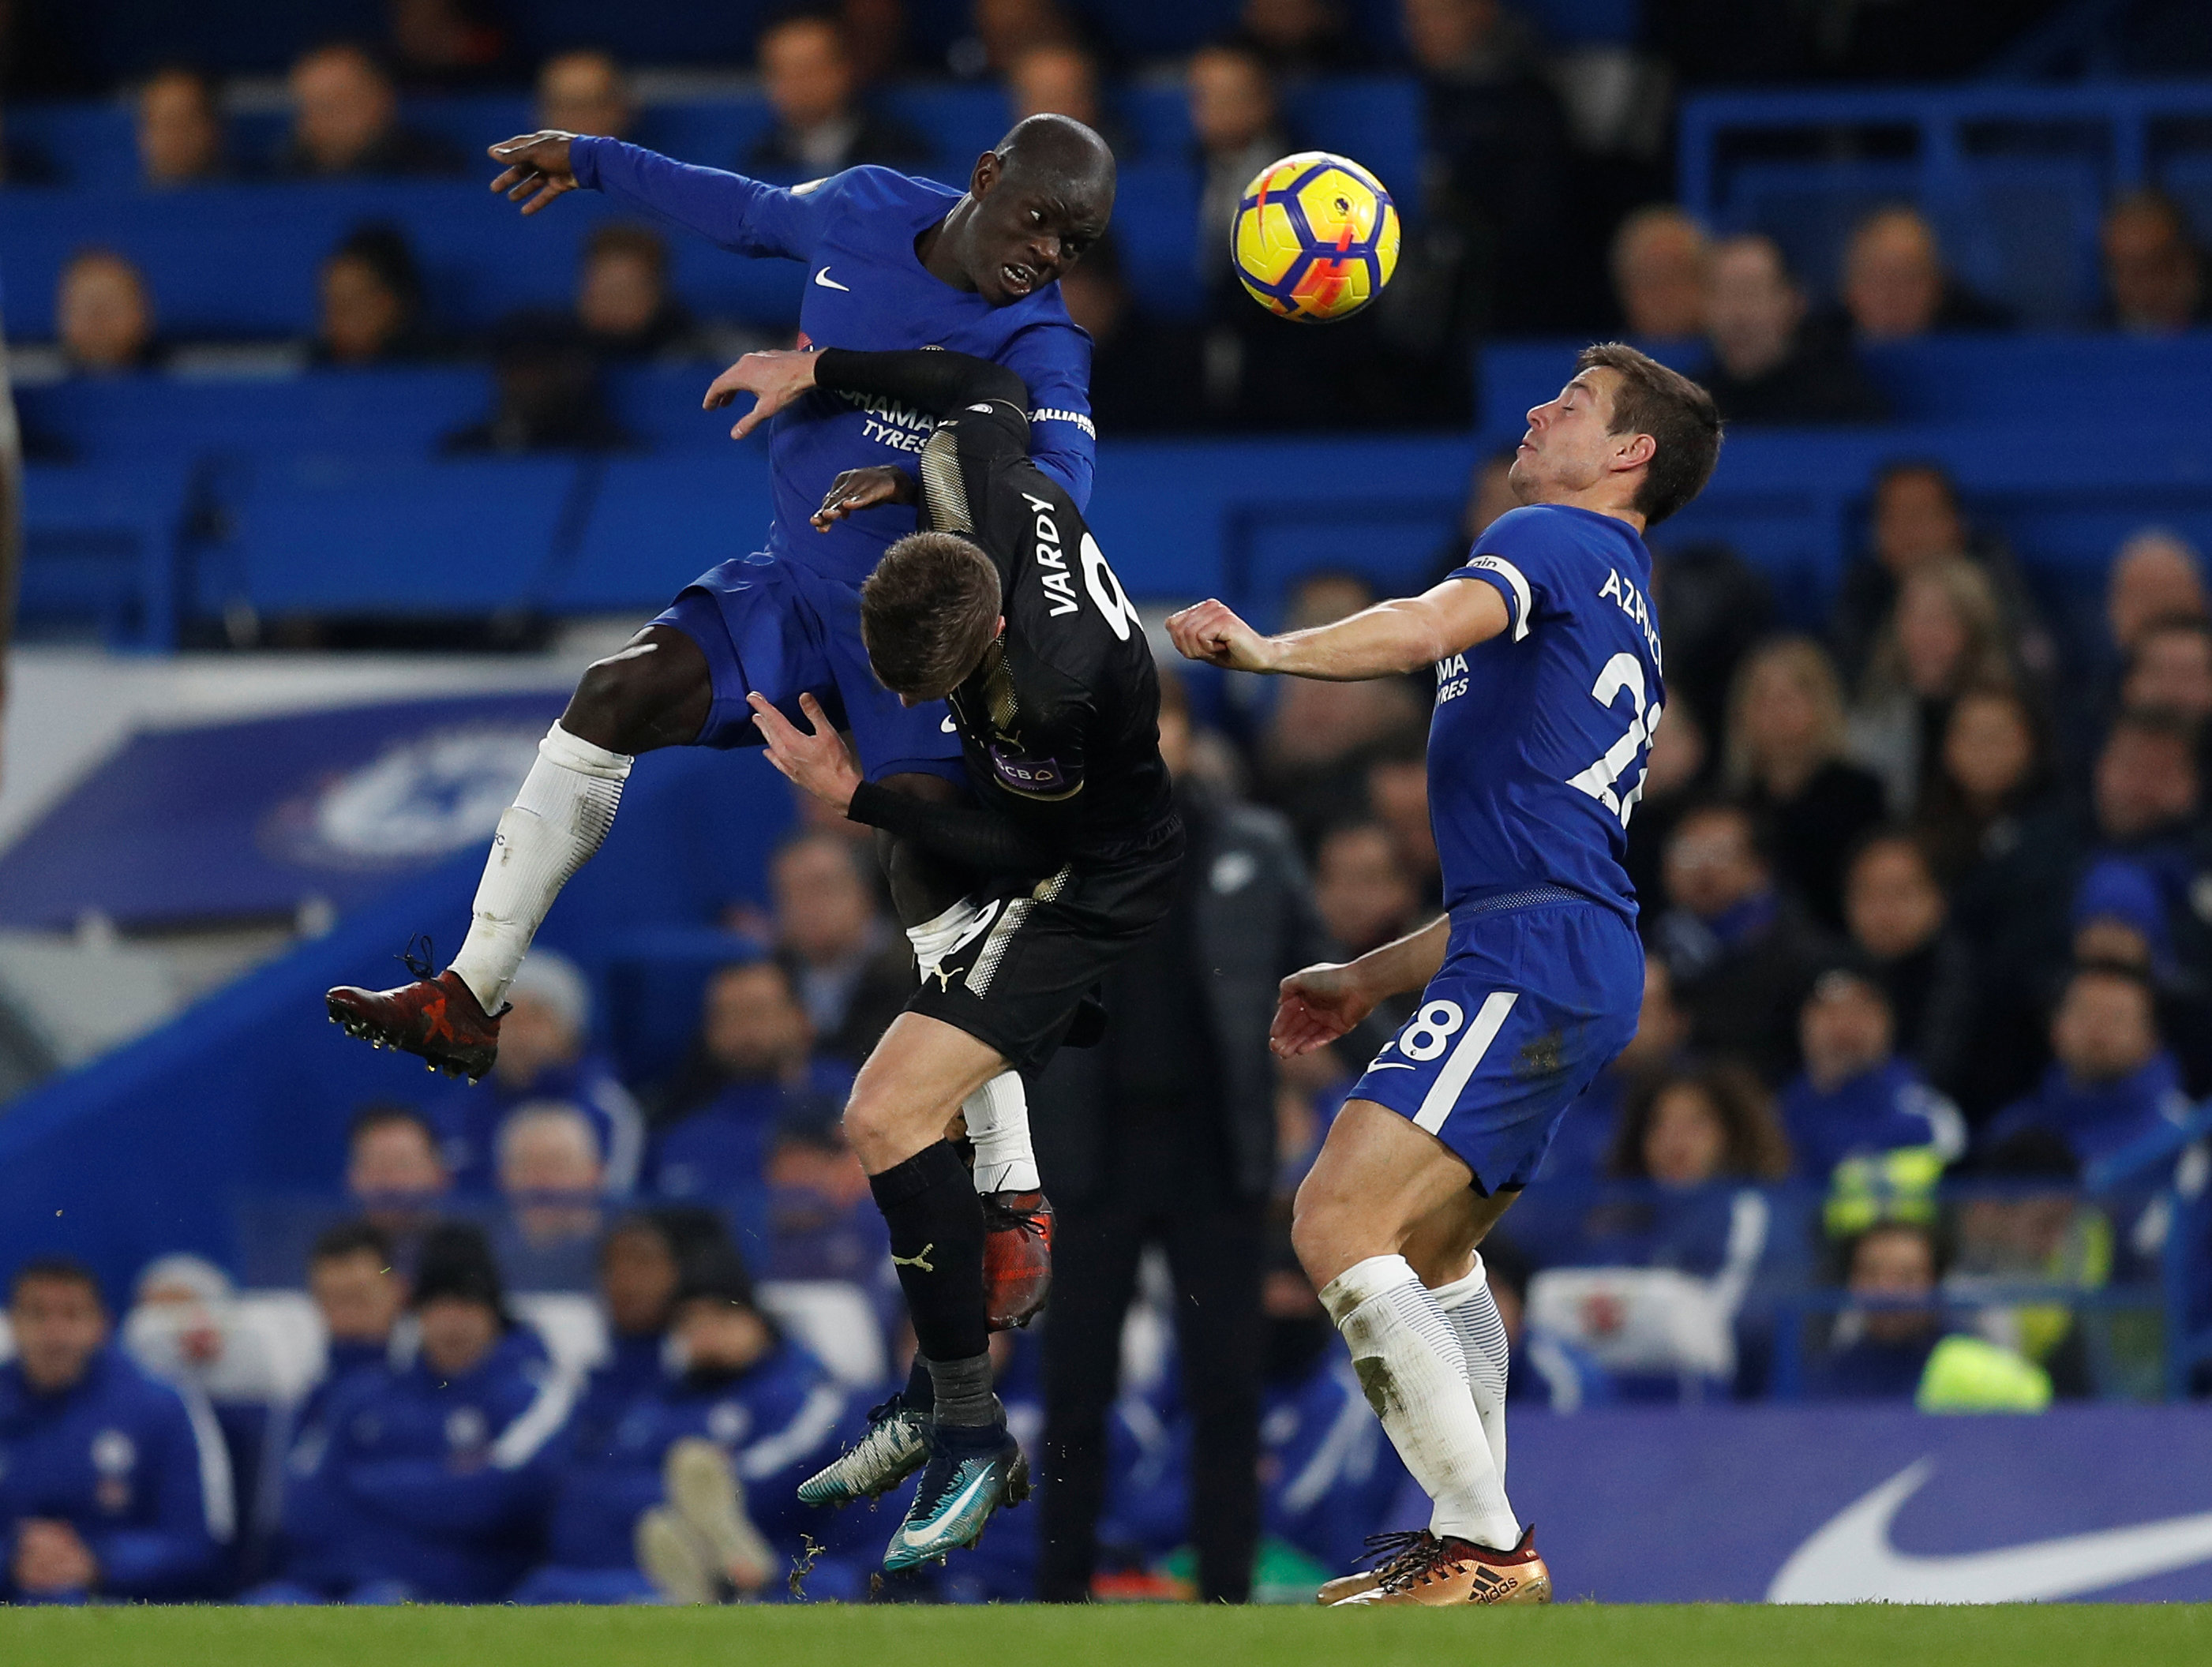 Football: Chelsea held 0-0 at home by Leicester